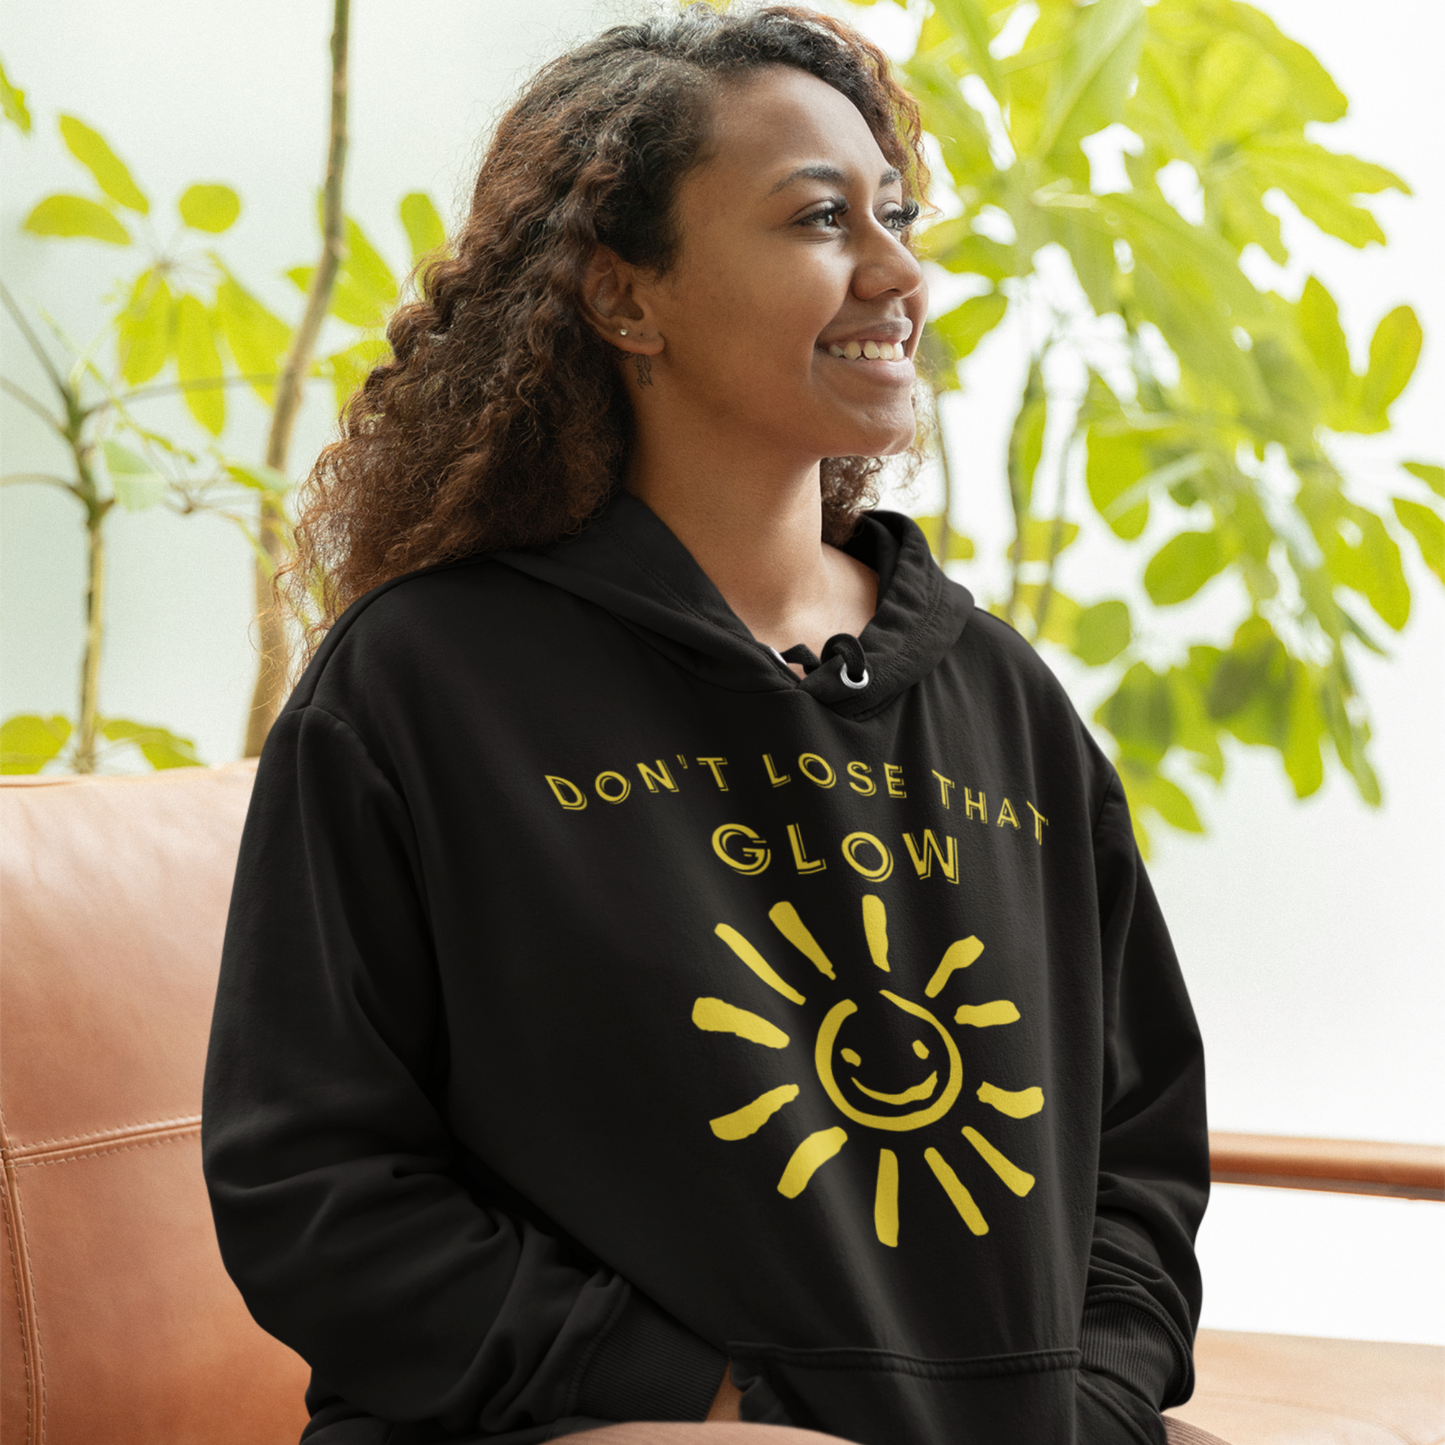 Don’t Lose that Glow (Graphic Yellow Text & Sun) Unisex Heavy Blend Hoodie - Style: Gildan 18500